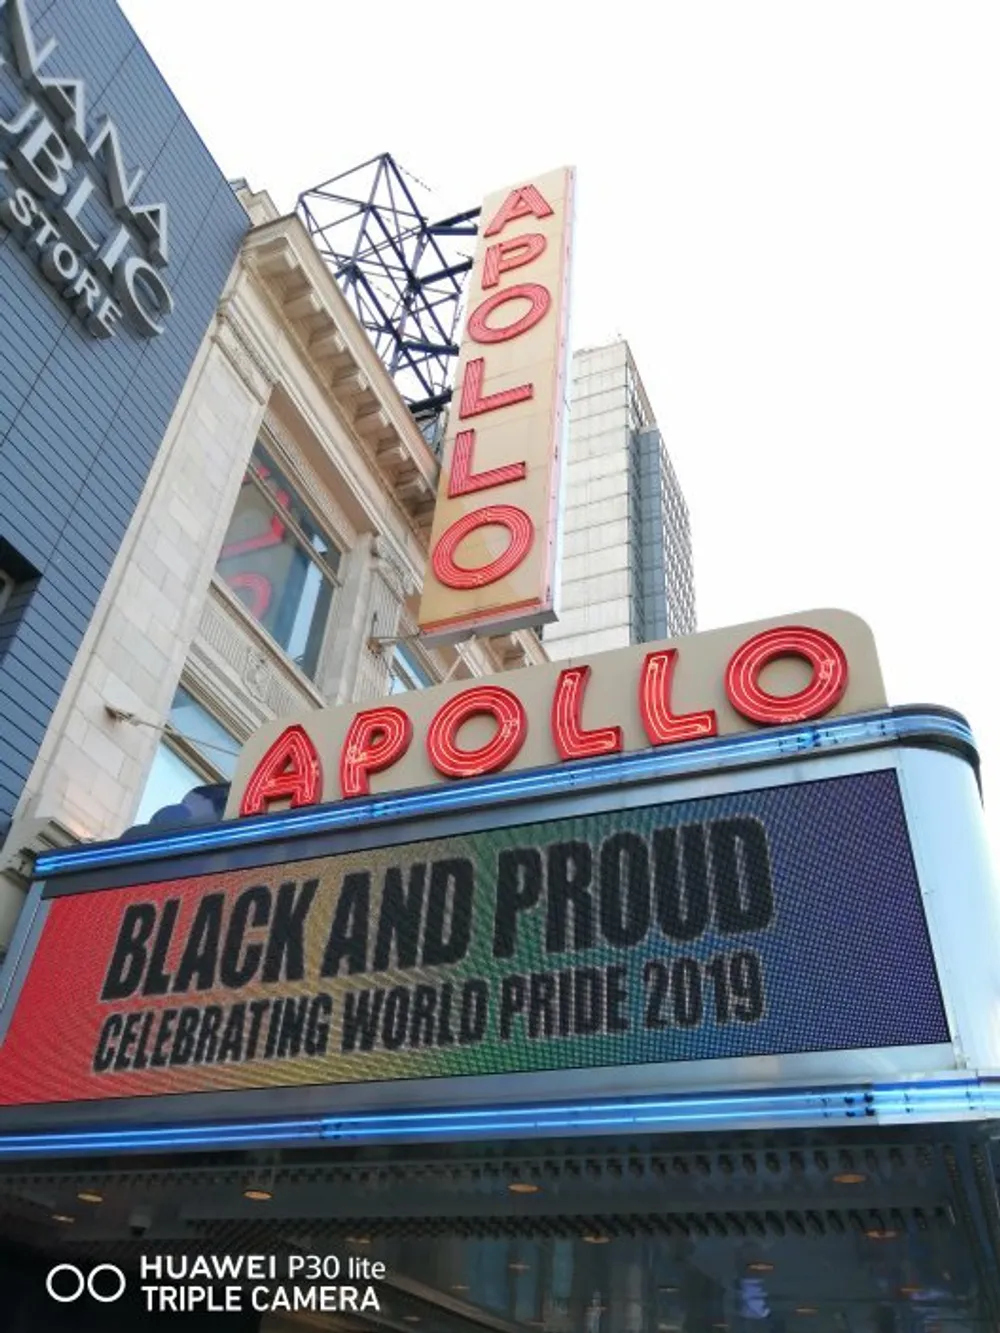 The image captures the iconic Apollo Theater marquee displaying a message BLACK AND PROUD CELEBRATING WORLD PRIDE 2019